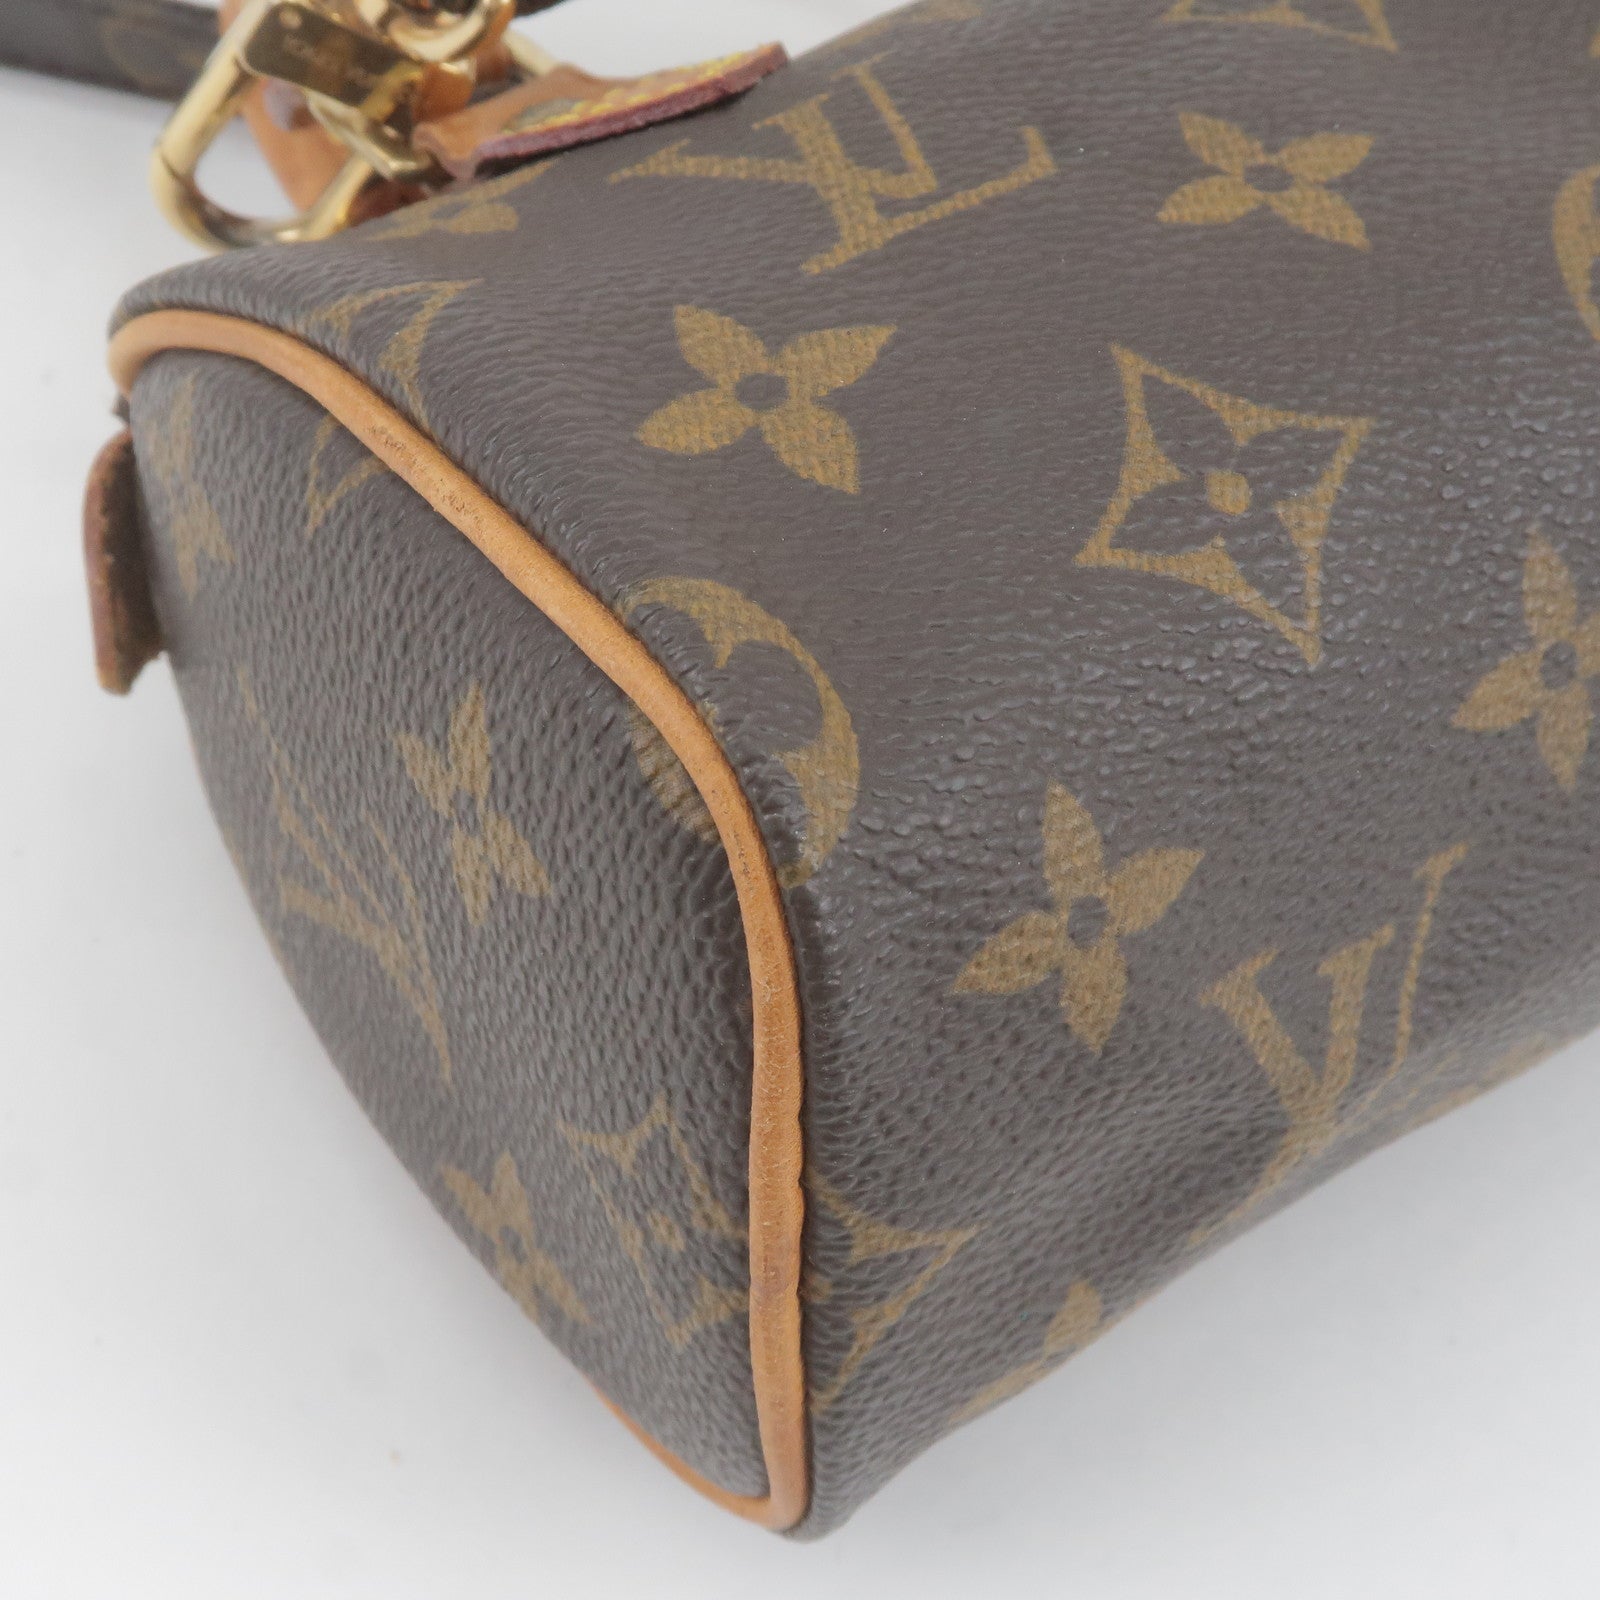 LOUIS VUITTON M41534 Mini Speedy With Strap Shoulder Bag Used